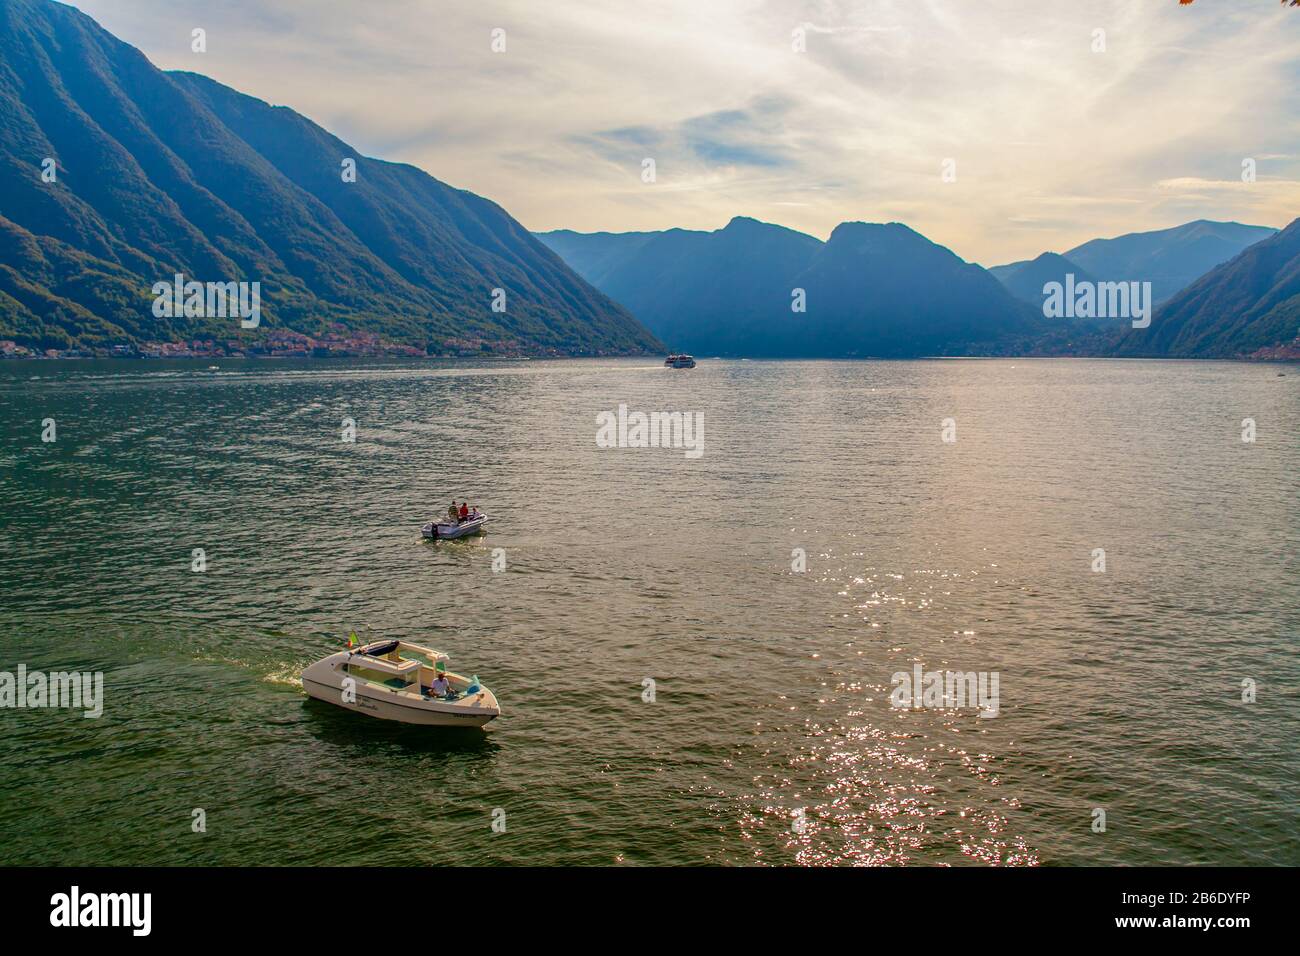 Boats on Lake of Como in Lombardy, Italy, at sunset Stock Photo